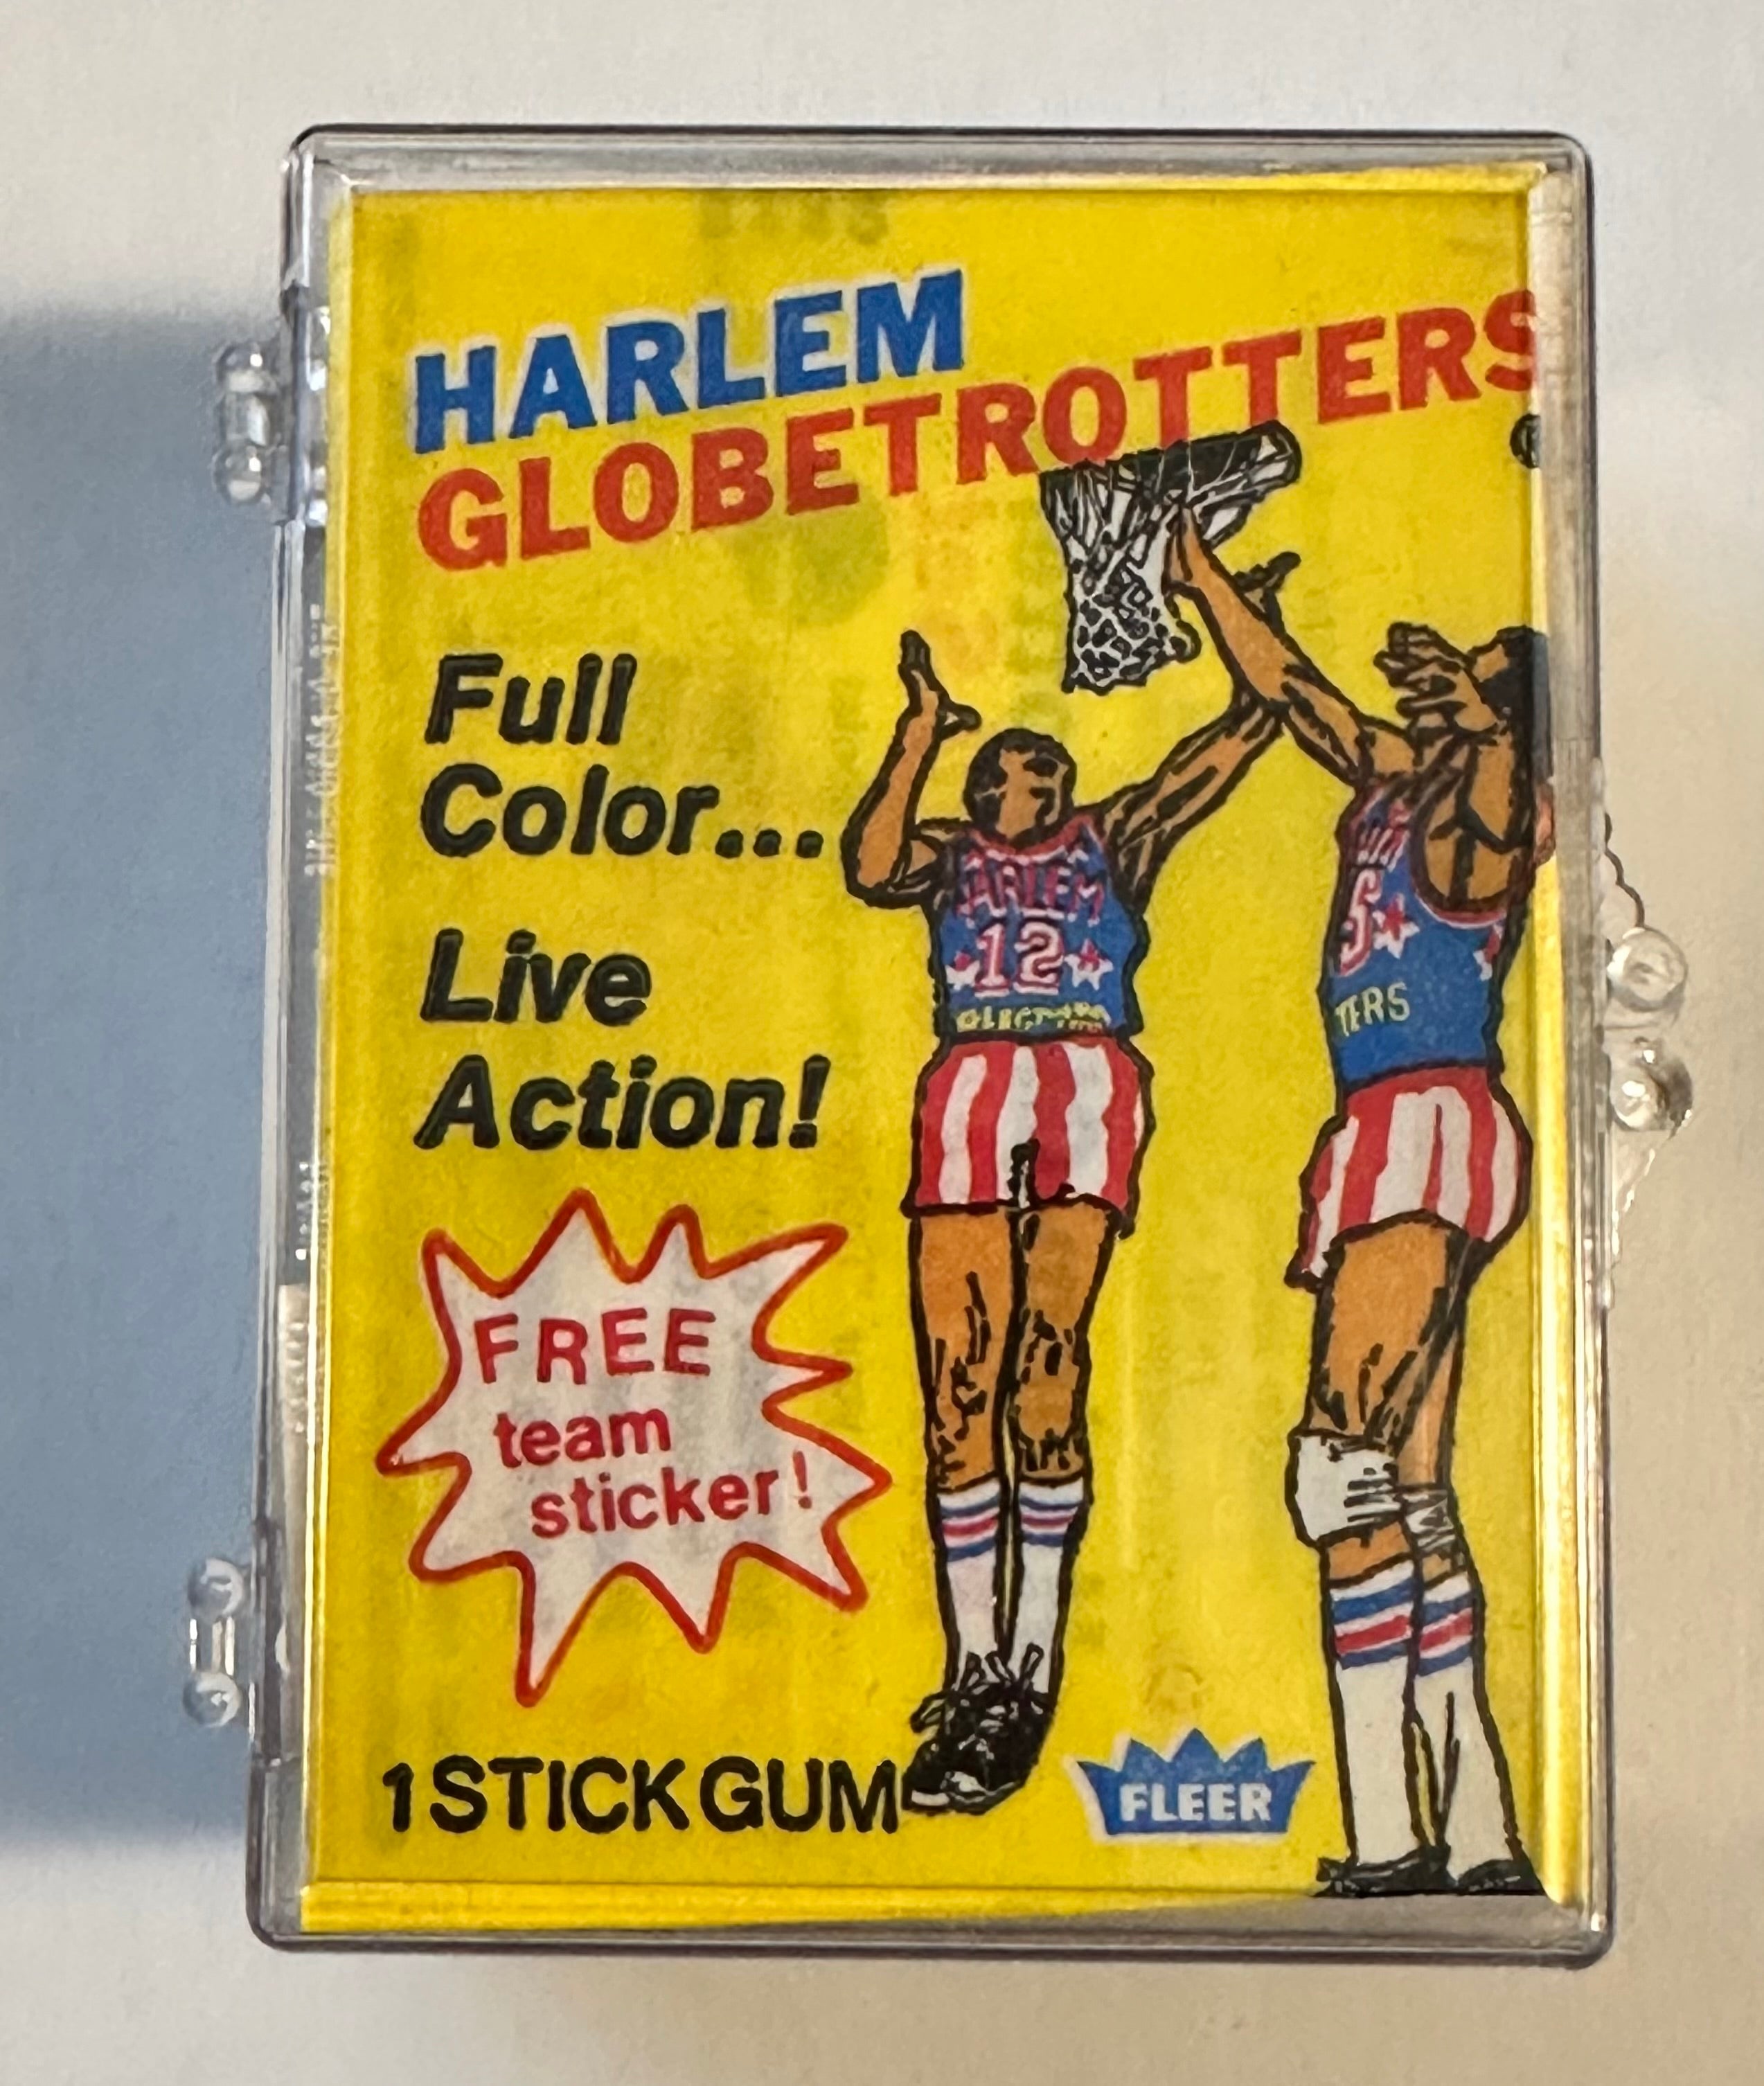 Harlem Globetrotters Topps basketball ex-nm high grade condition complete cards set with sticker and wrapper 1971